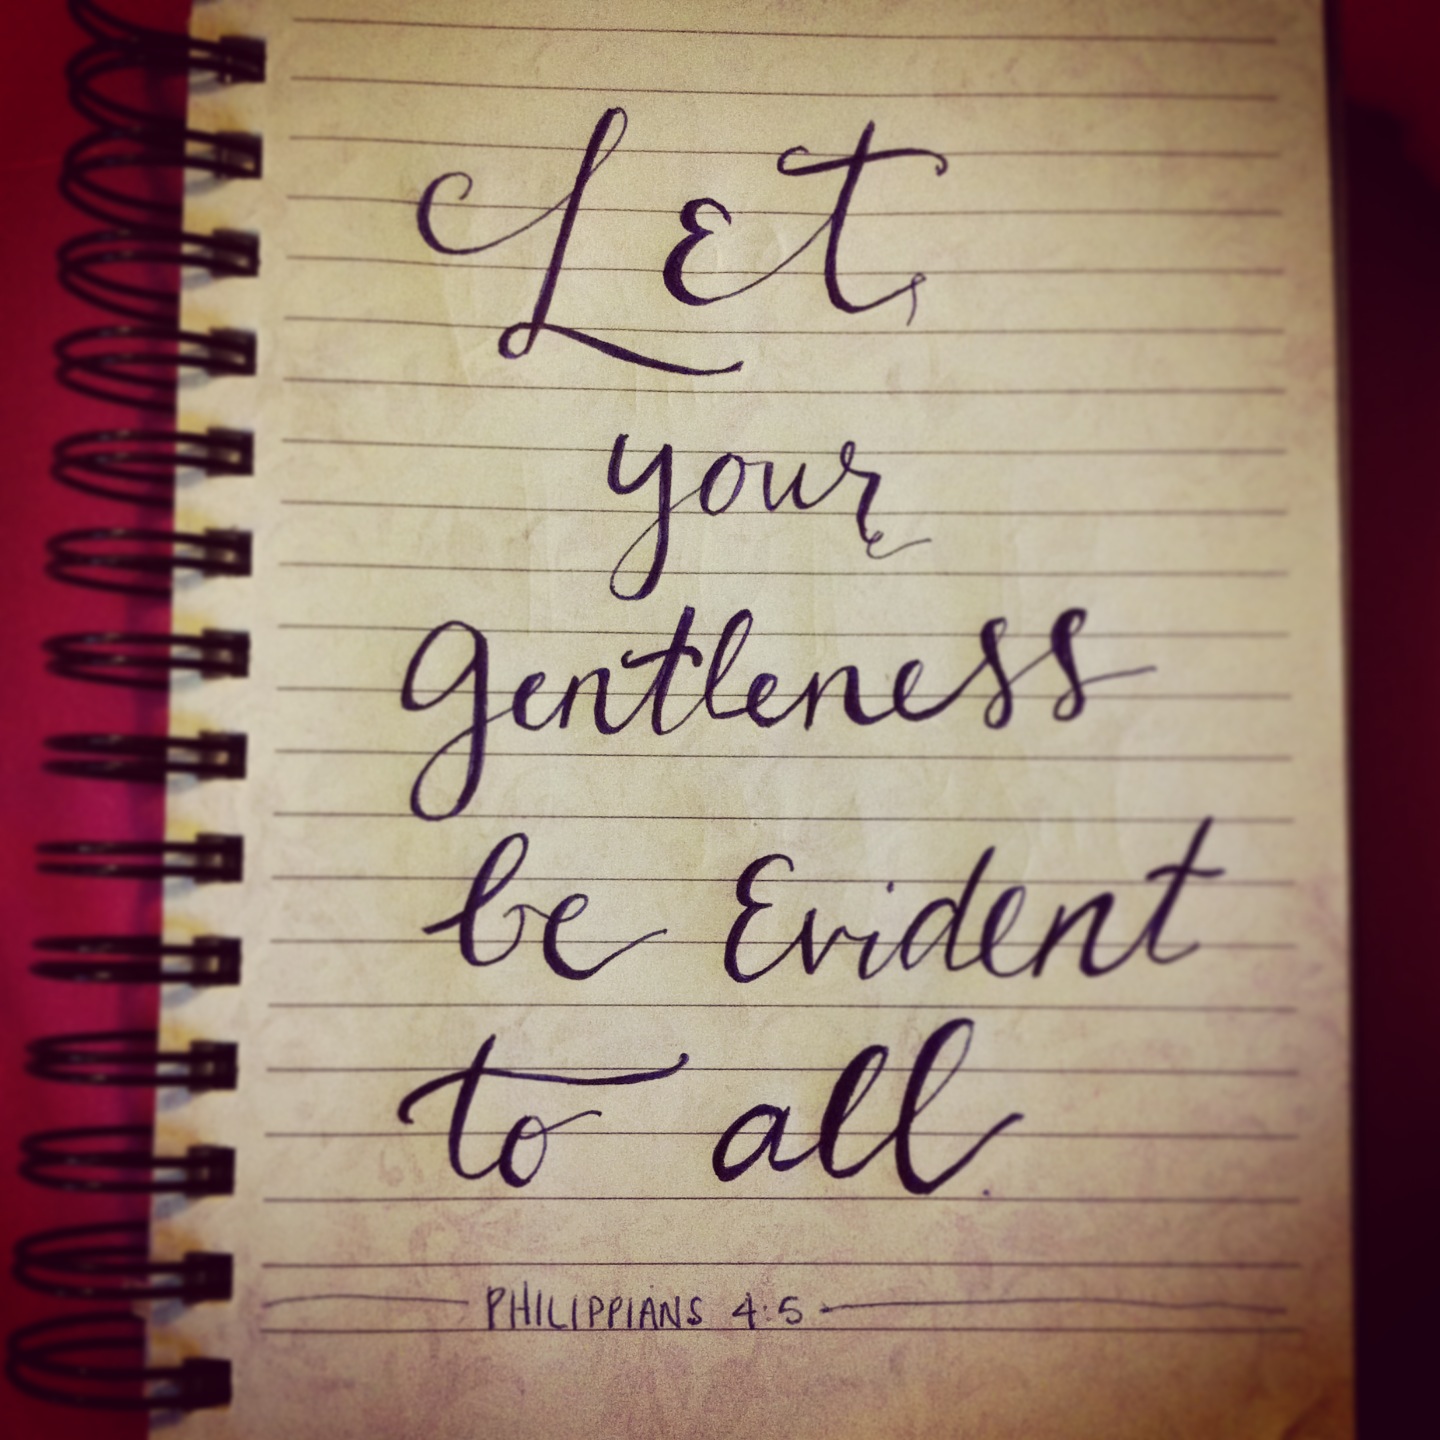 Gentleness Evident to All | The Cripplegate